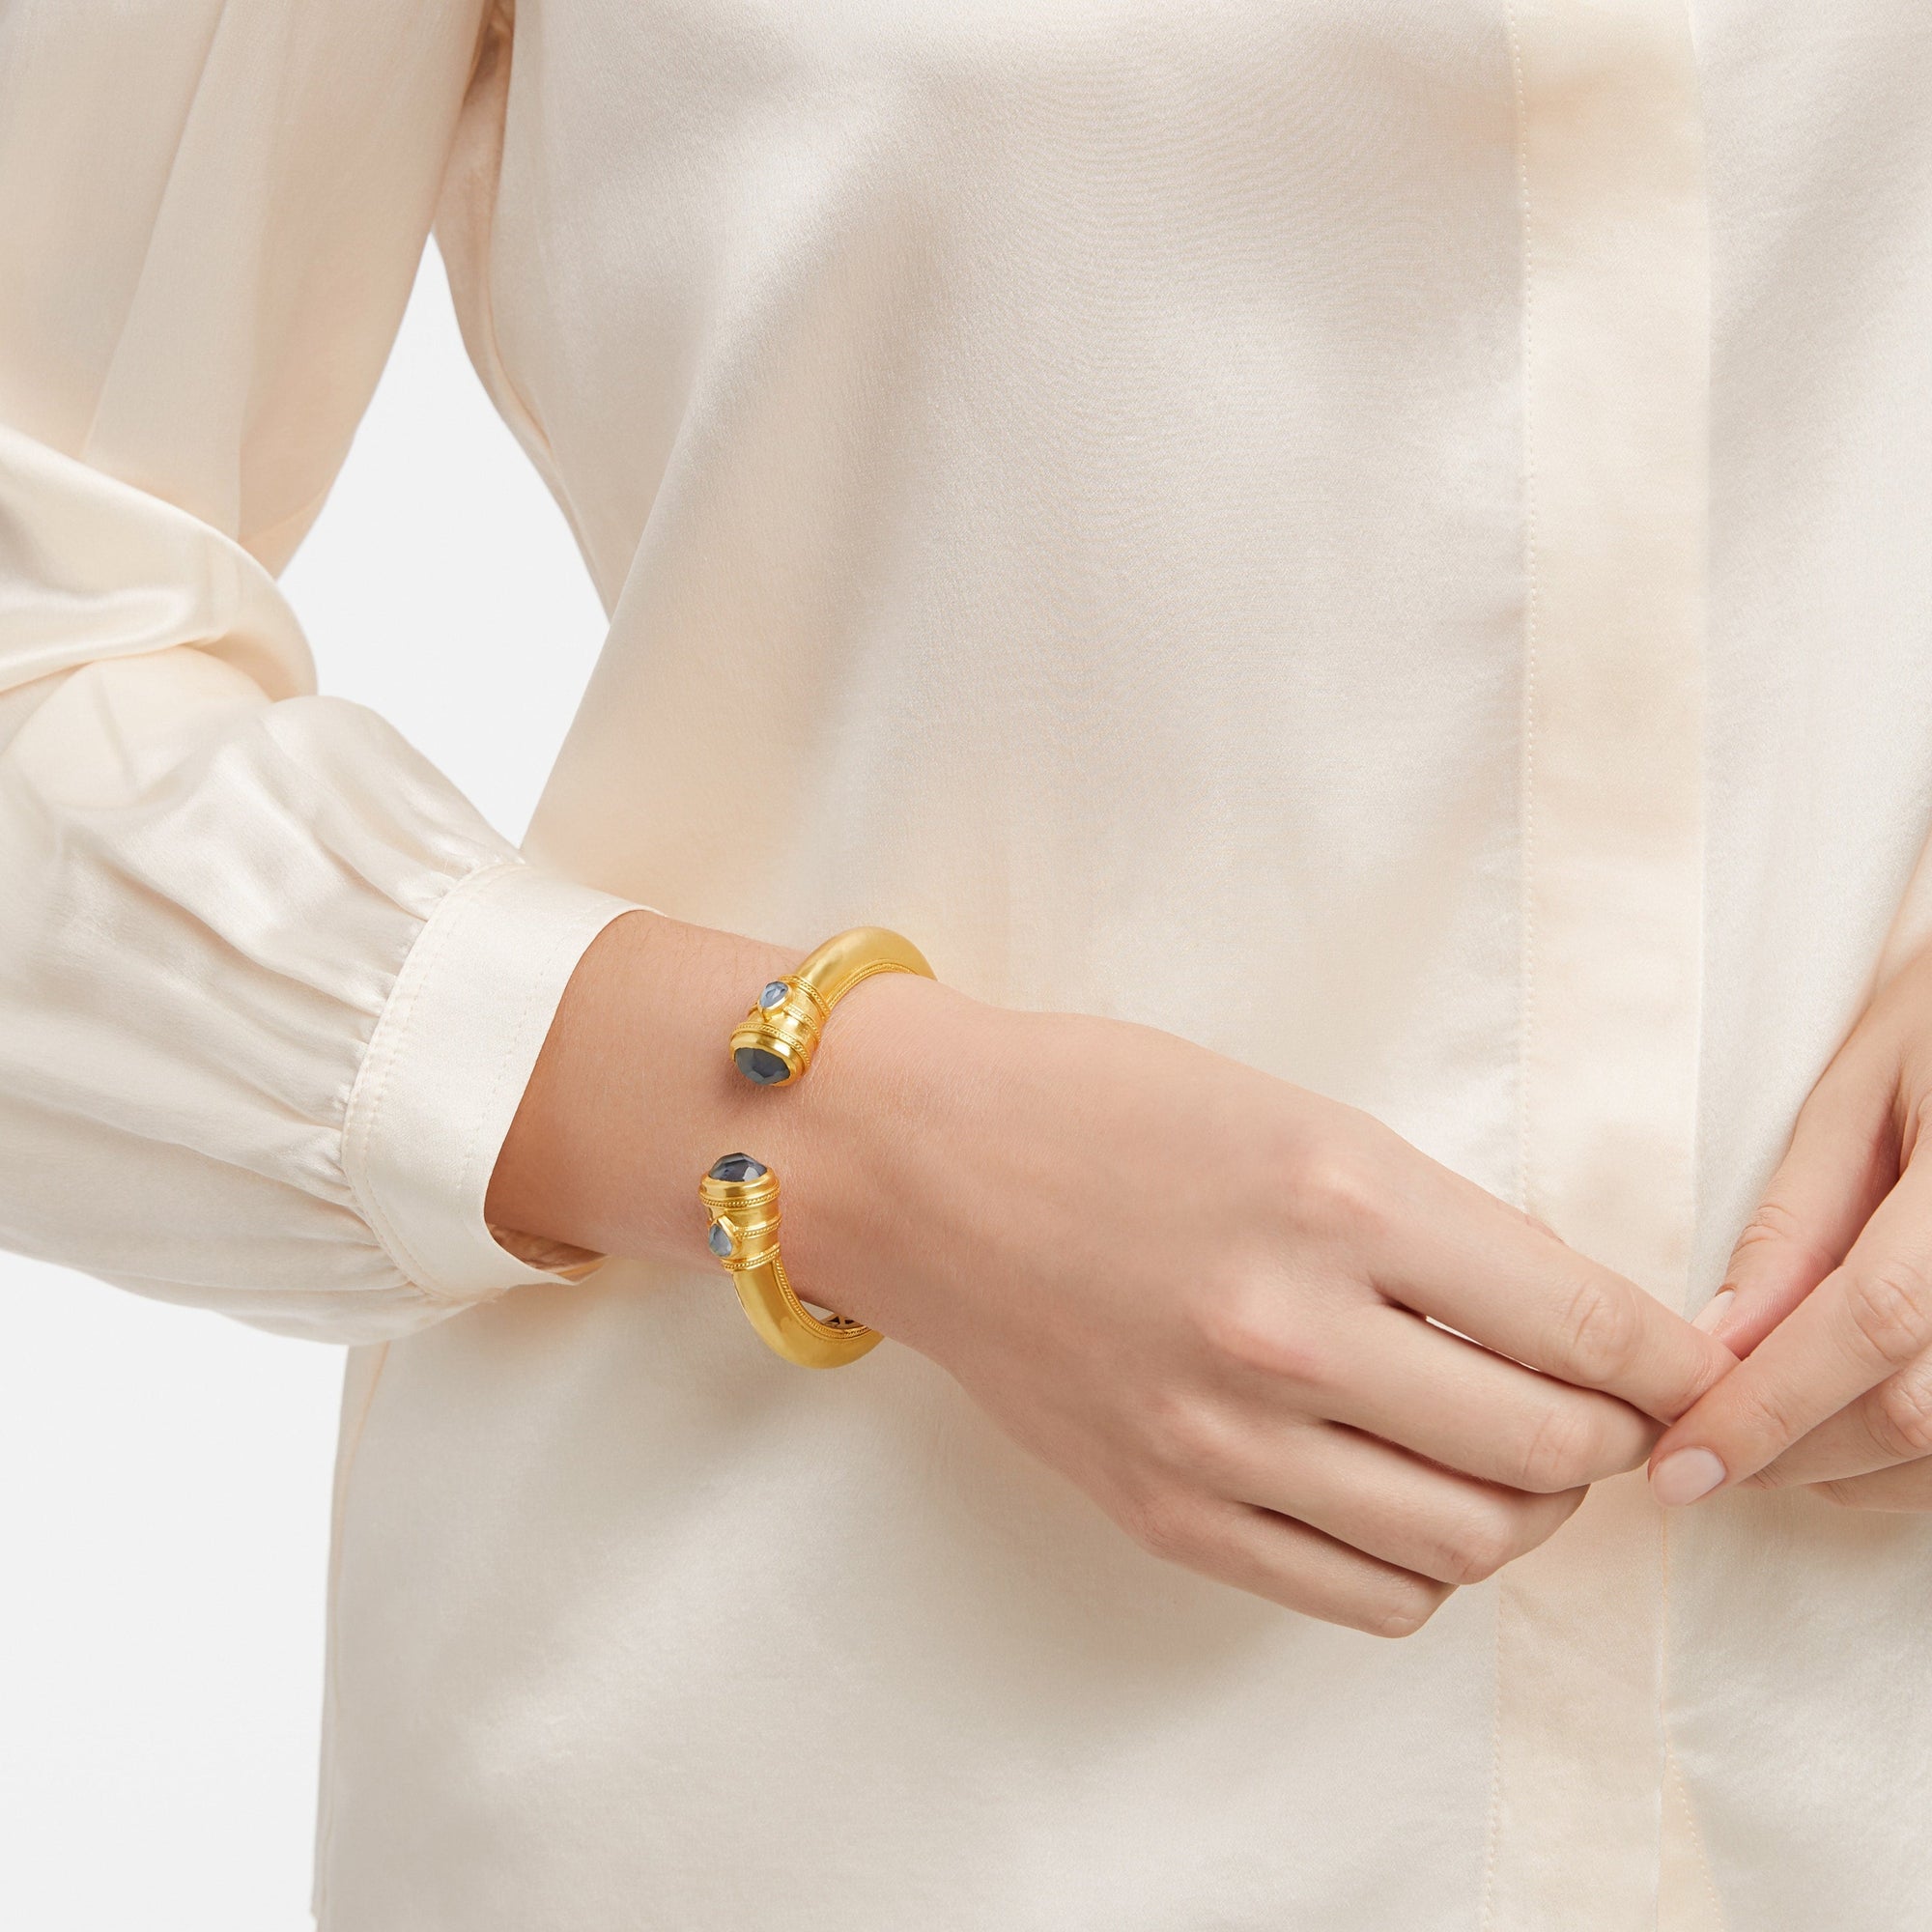 Cassis, a Julie Vos Hinge Cuff bracelet on the wrist of a woman, carousel